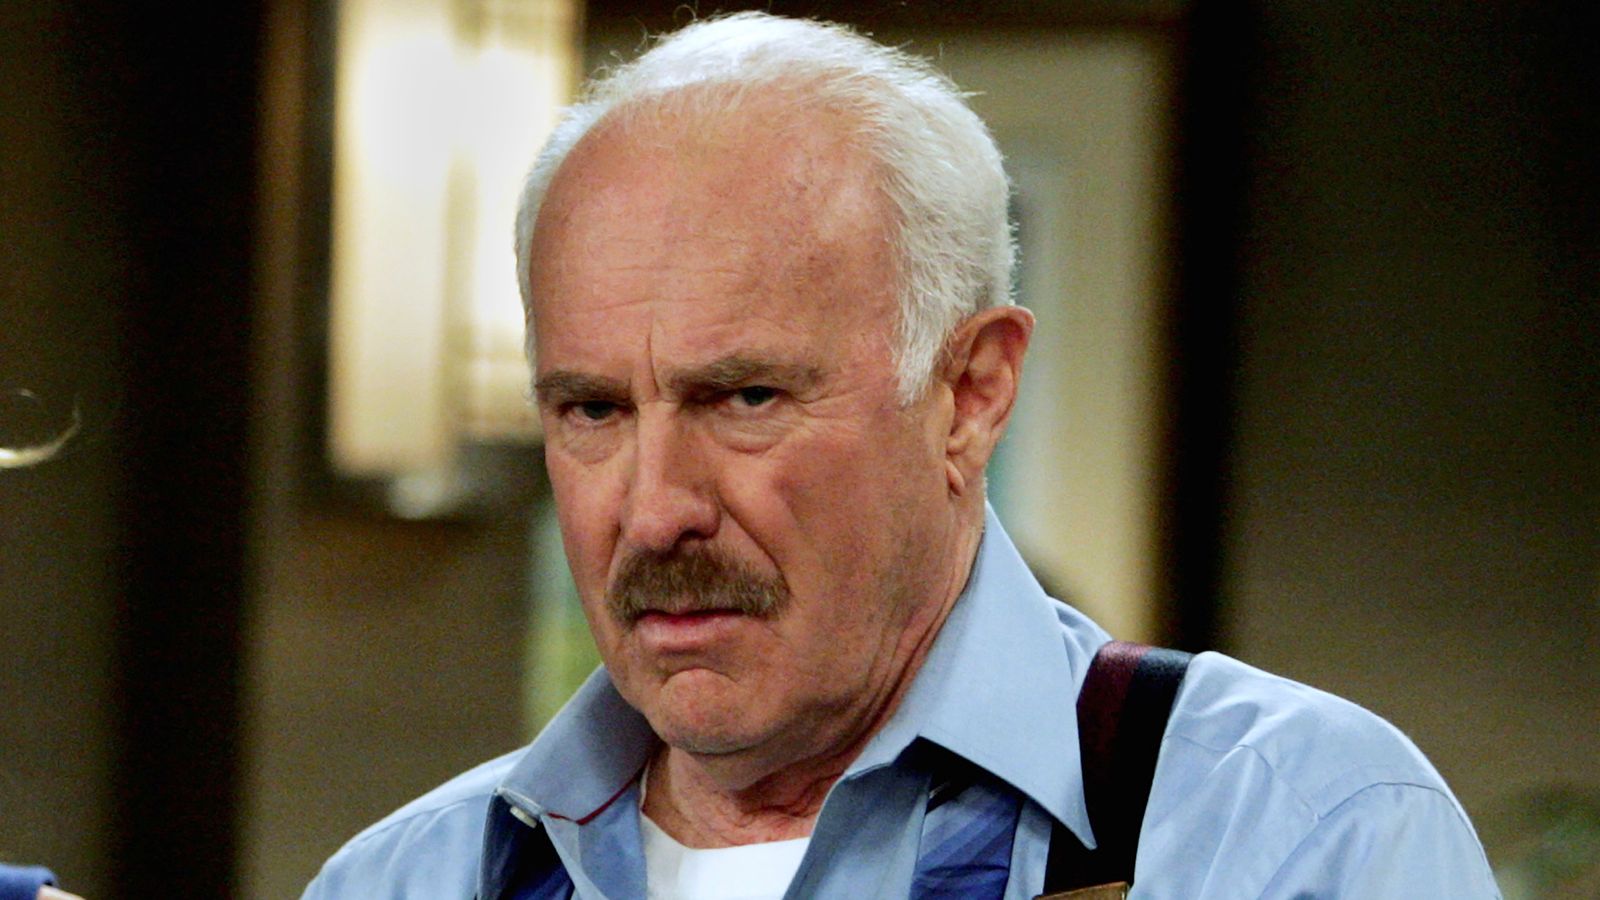 Dabney Coleman, actor who starred in Boardwalk Empire and 9 to 5, dies